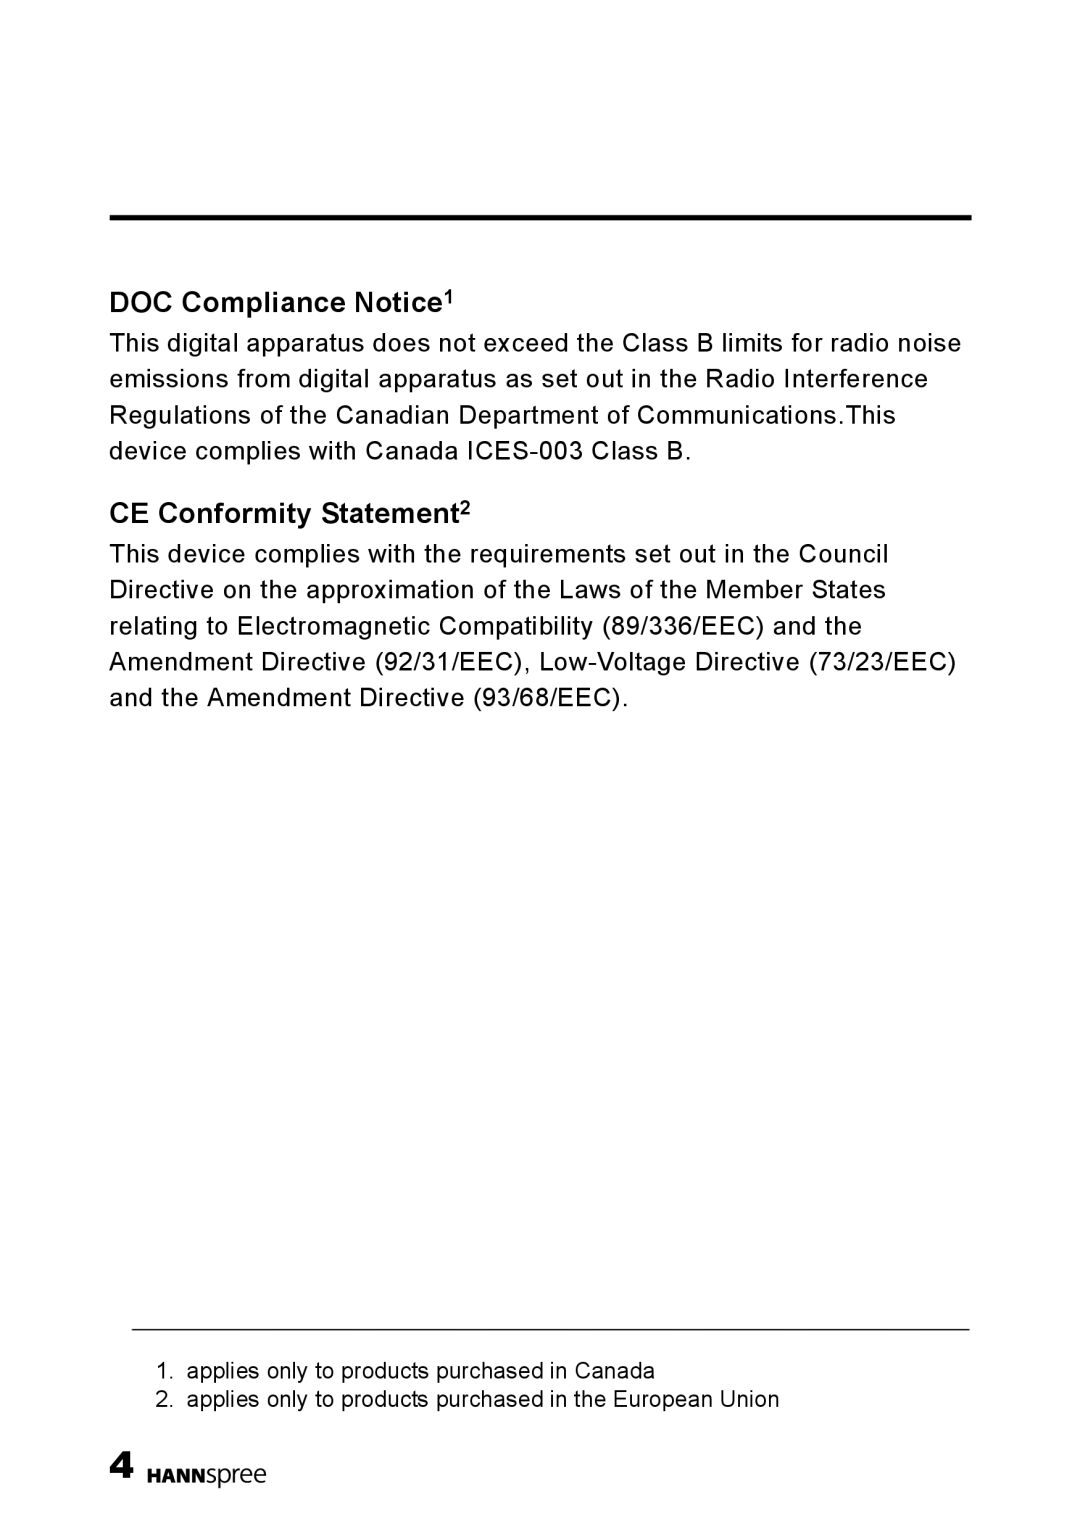 HANNspree HANNSz.crab DOC Compliance Notice1, CE Conformity Statement2, applies only to products purchased in Canada 